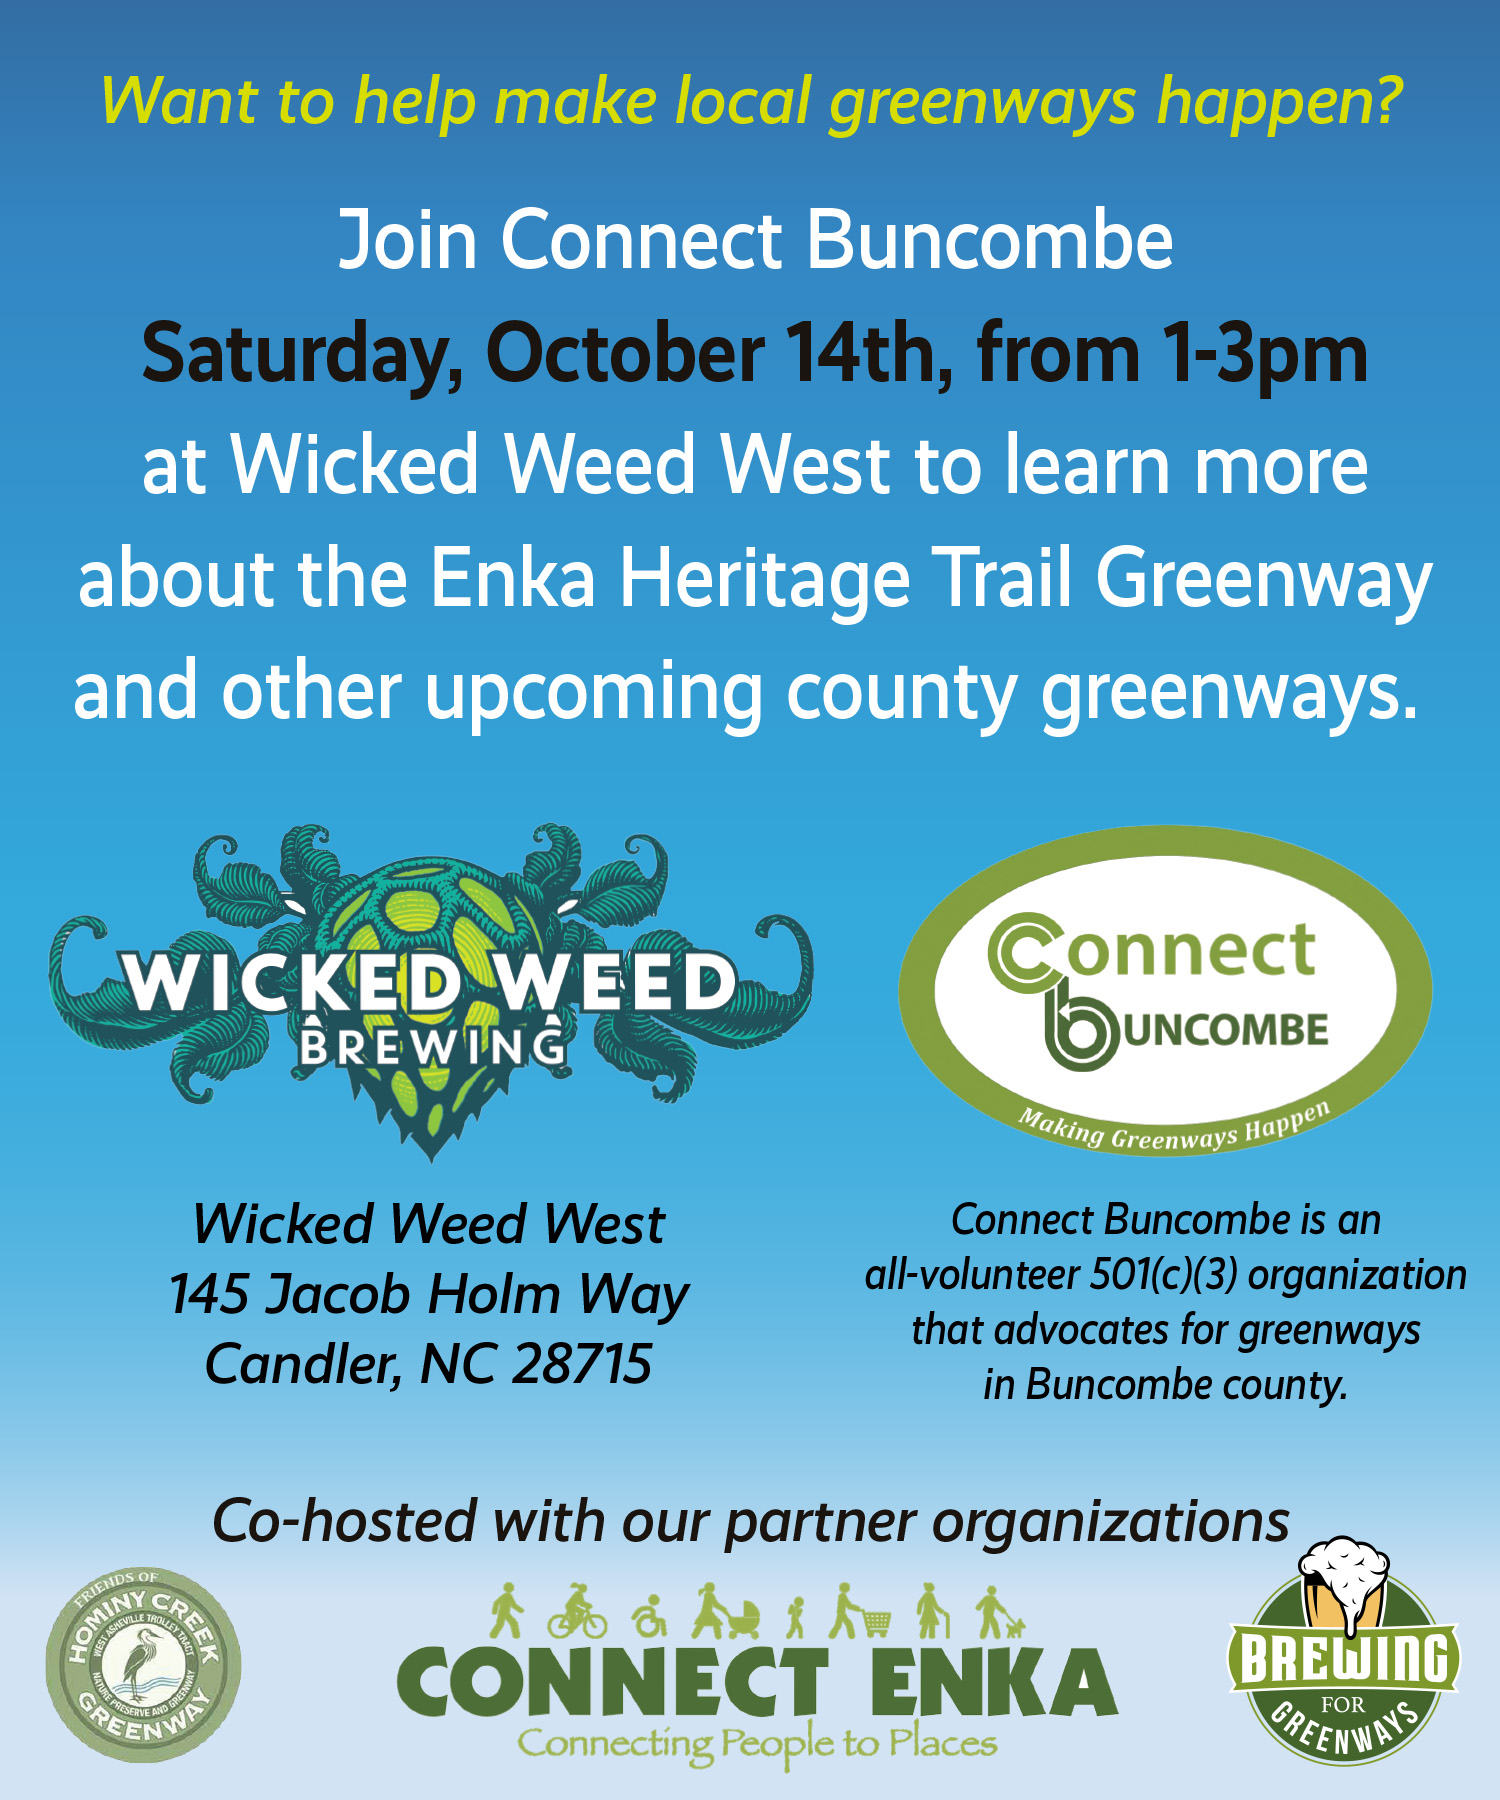 Wicked Weed Brewing - Enka Heritage Trail Greenway Fundraiser